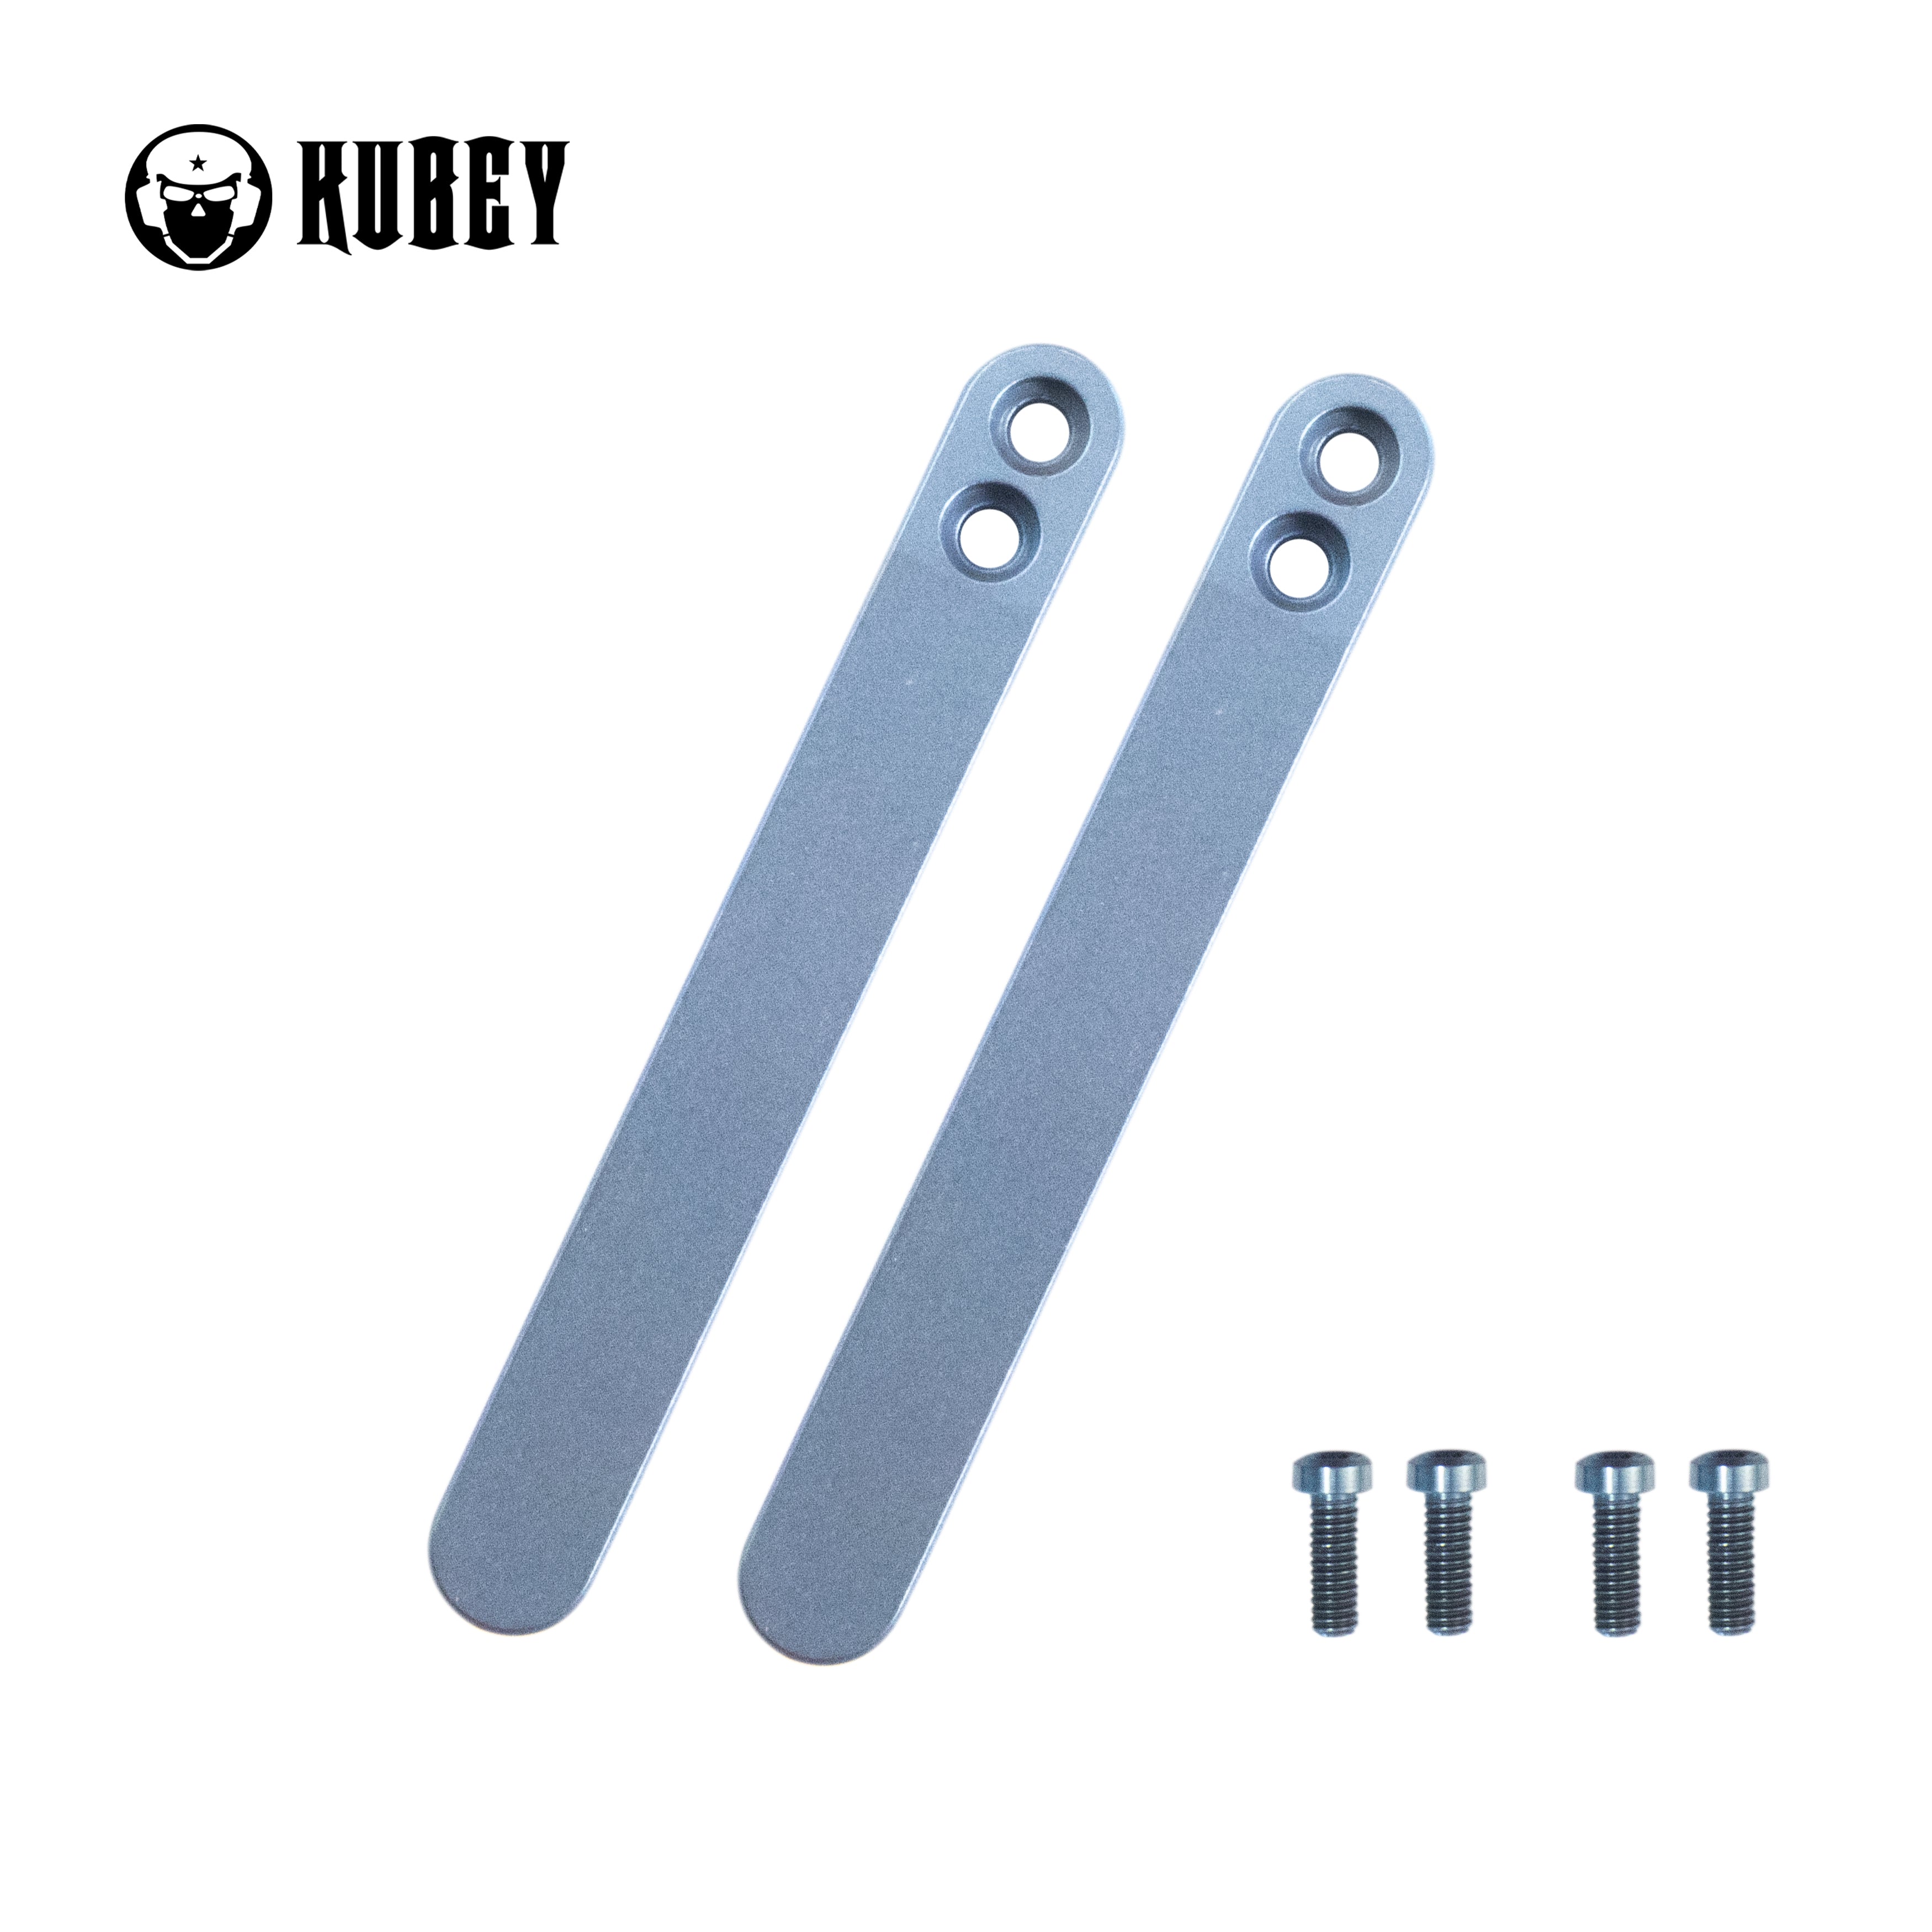 Kubey Titanium Clip for Folding Knives, 2 Pieces with 4 Screws, Blue/Blue, KH036